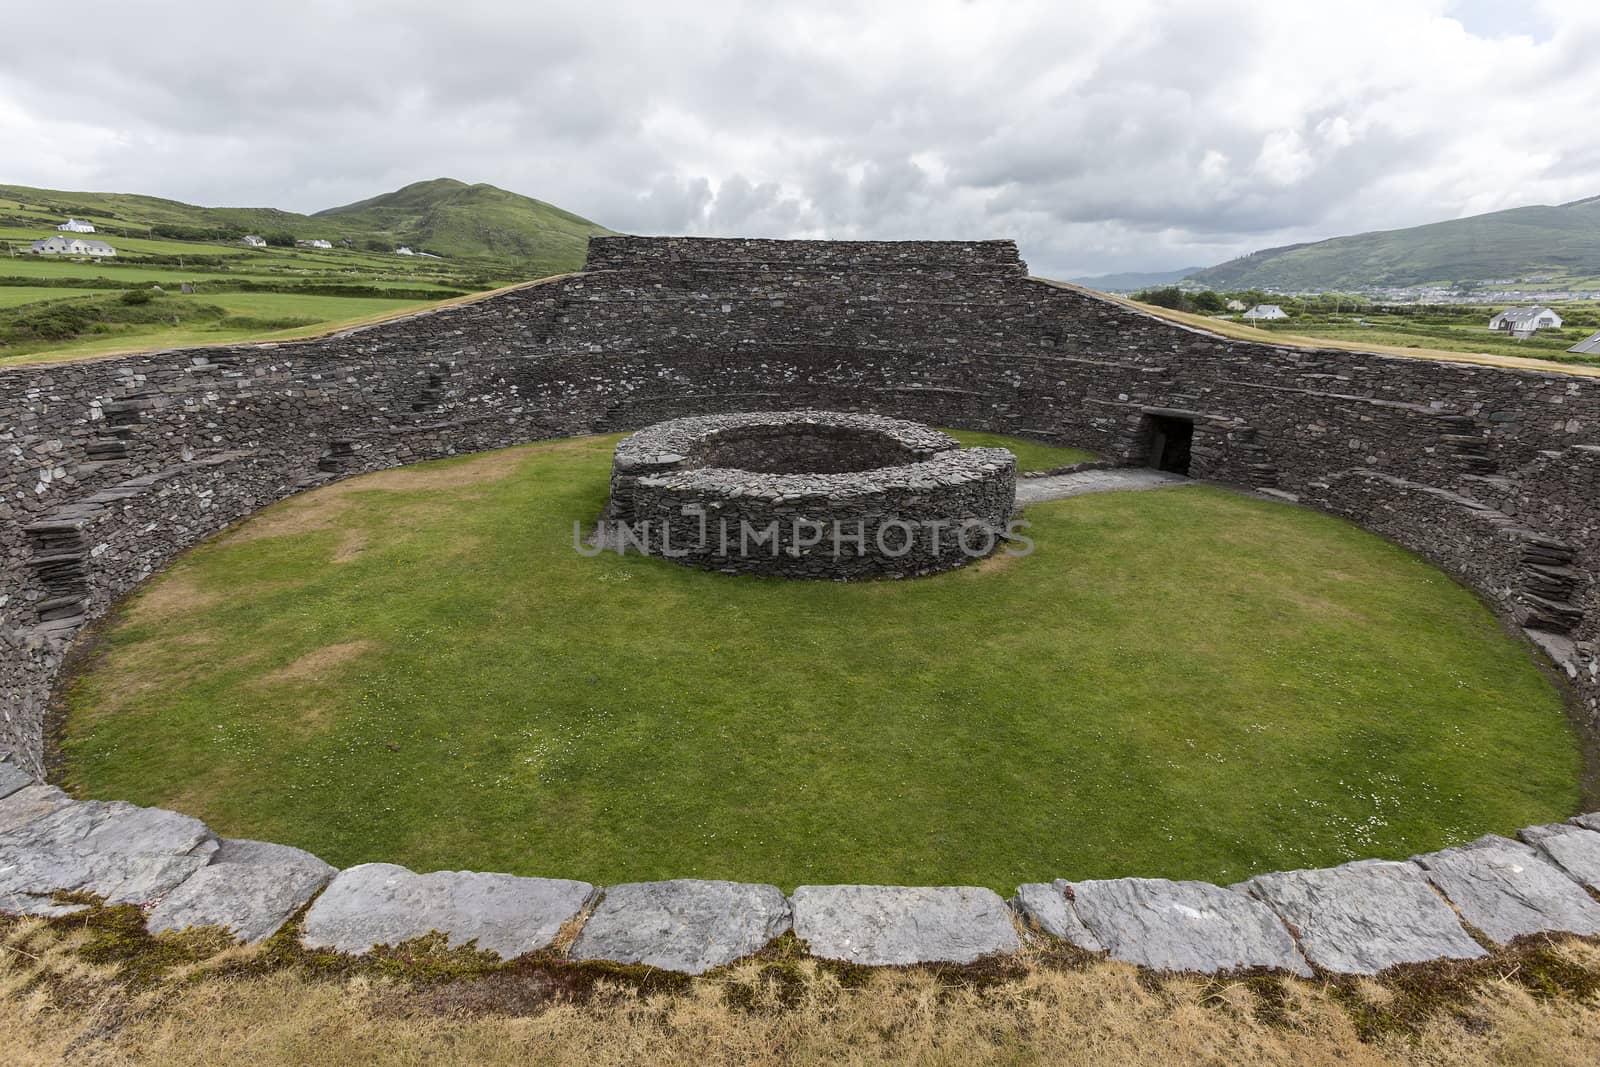 Cahergall Stone Fort near Cahirsiveen in southwest Ireland. This stone fort or Cashel was built as a protected farmstead. It is likely that someone of local importance lived here about a 1000 years ago.